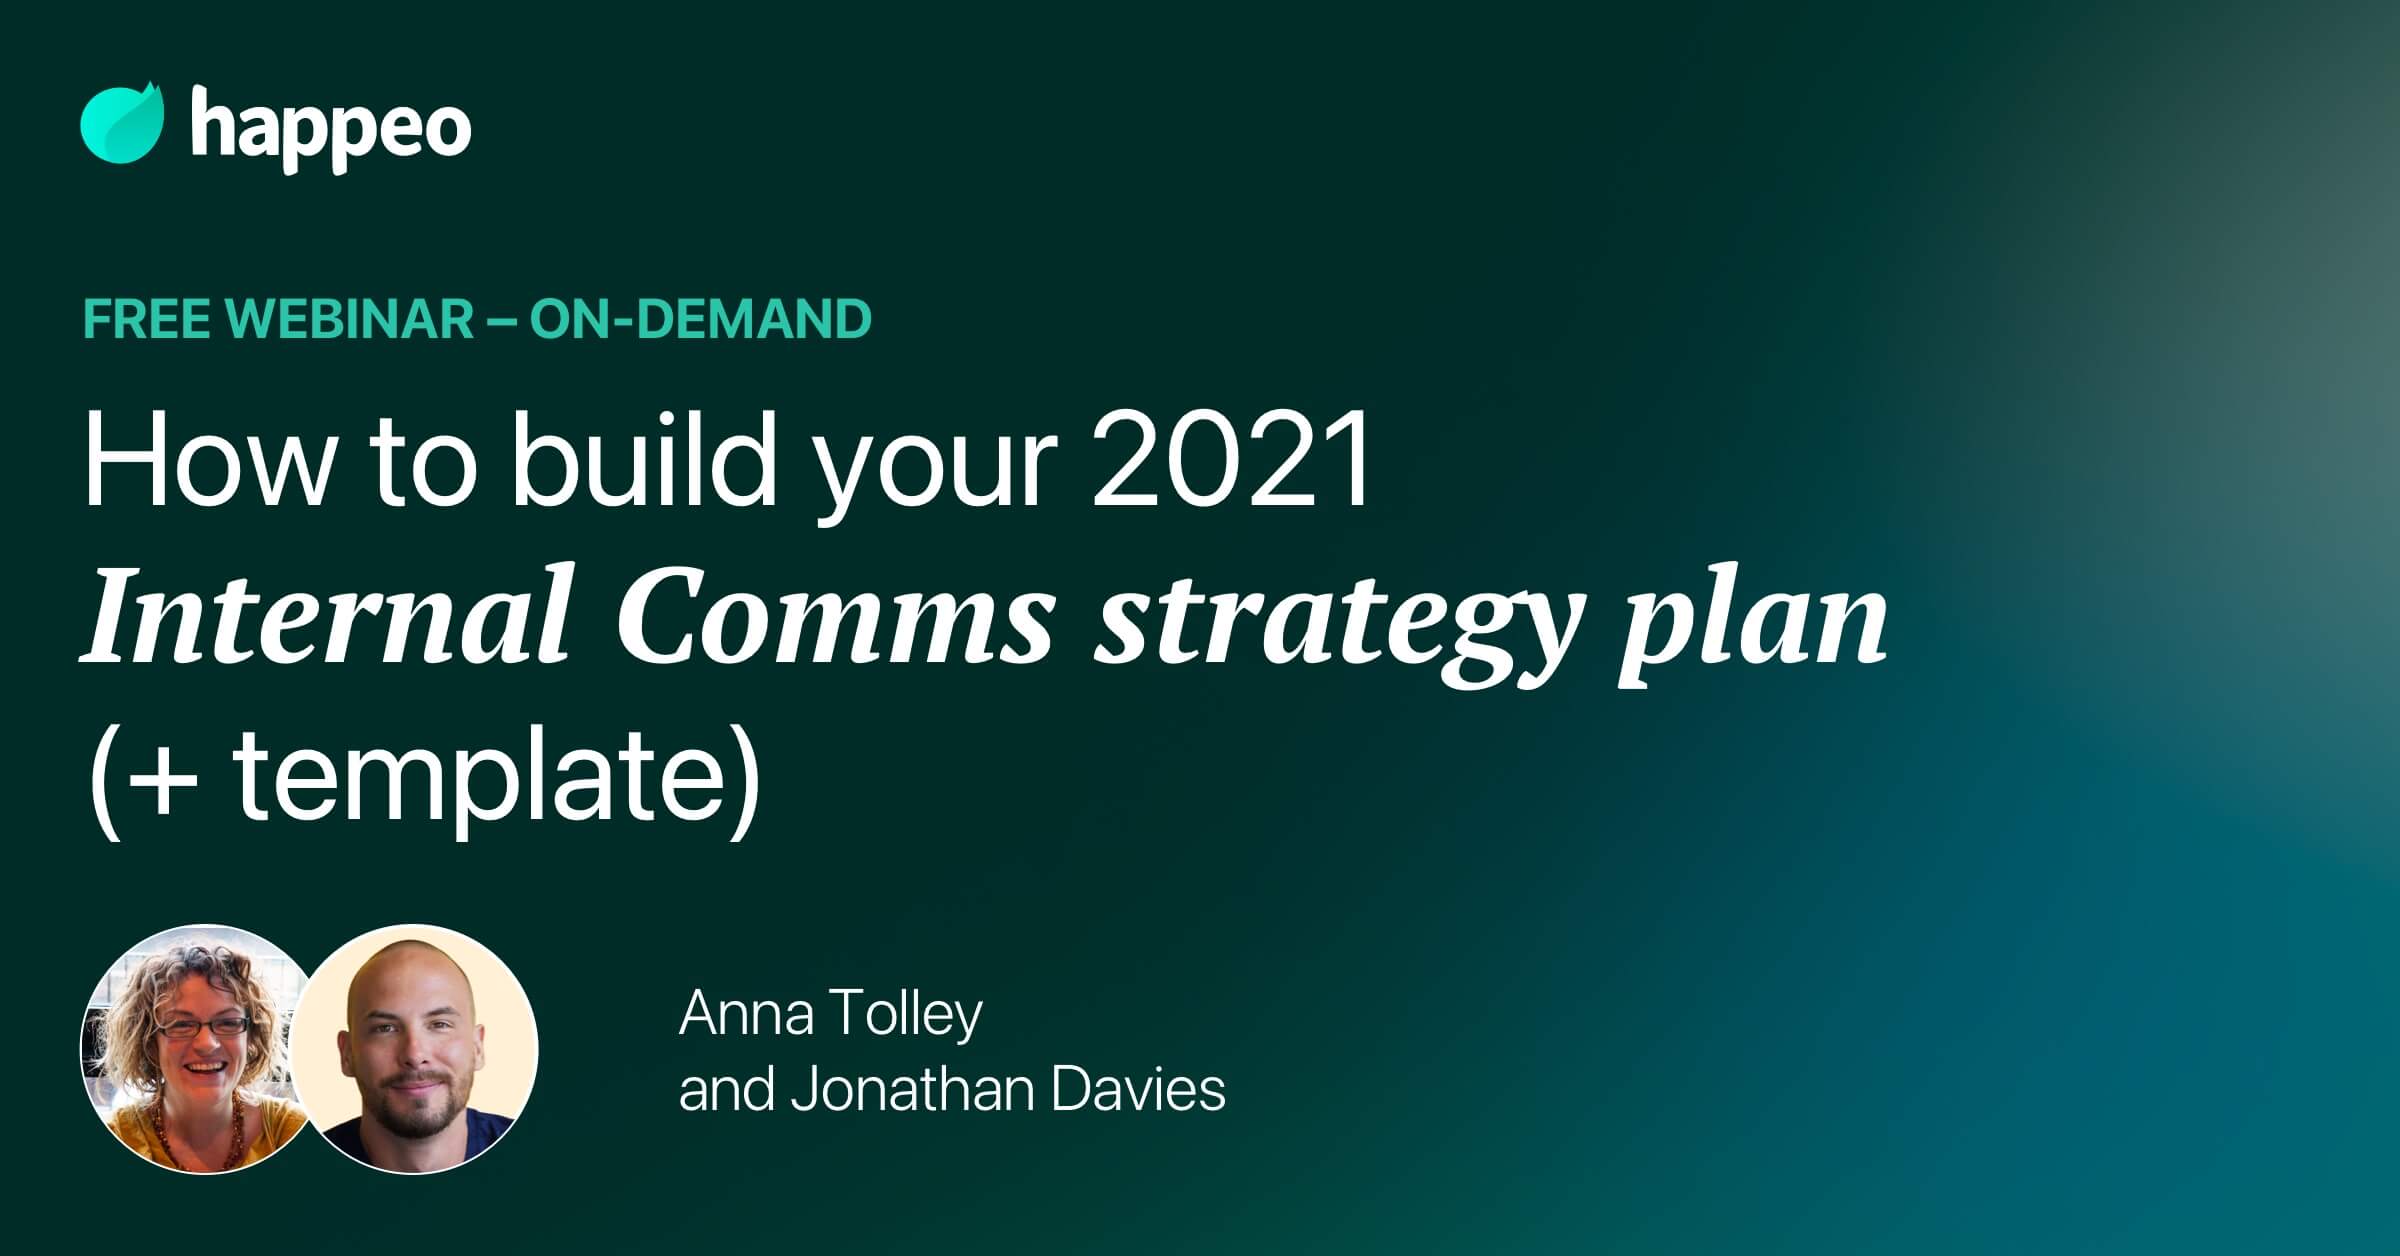 How to build your 2021 Internal Comms strategy plan